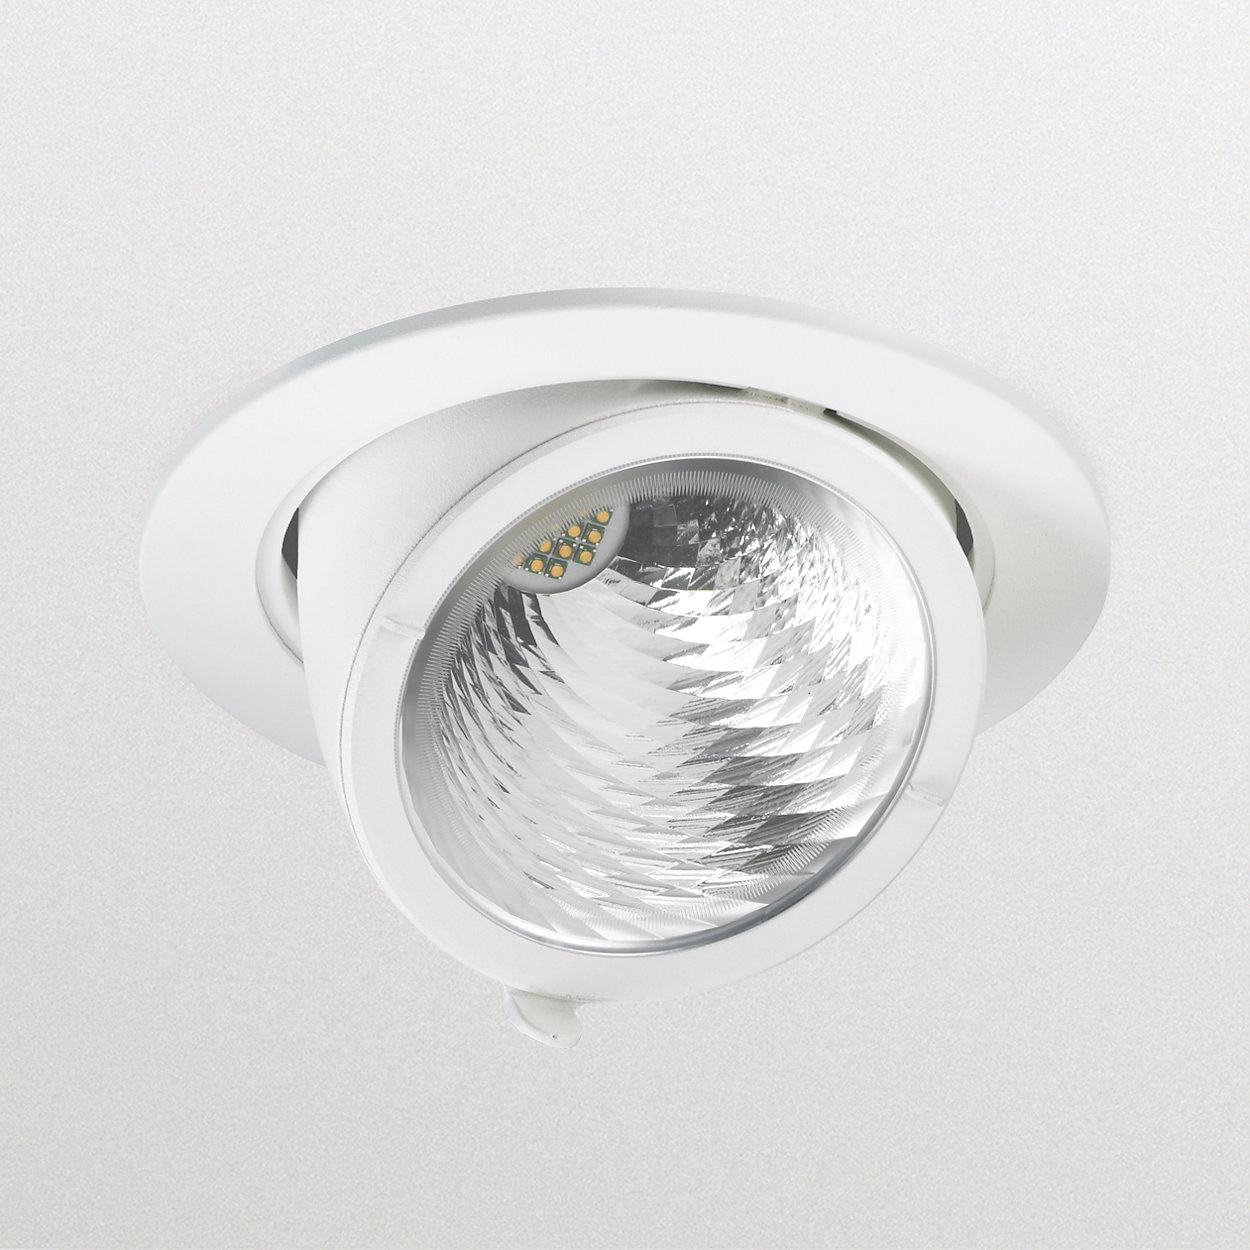 LuxSpace Accent Mini – The smallest recessed spotlights for retail and hospitality